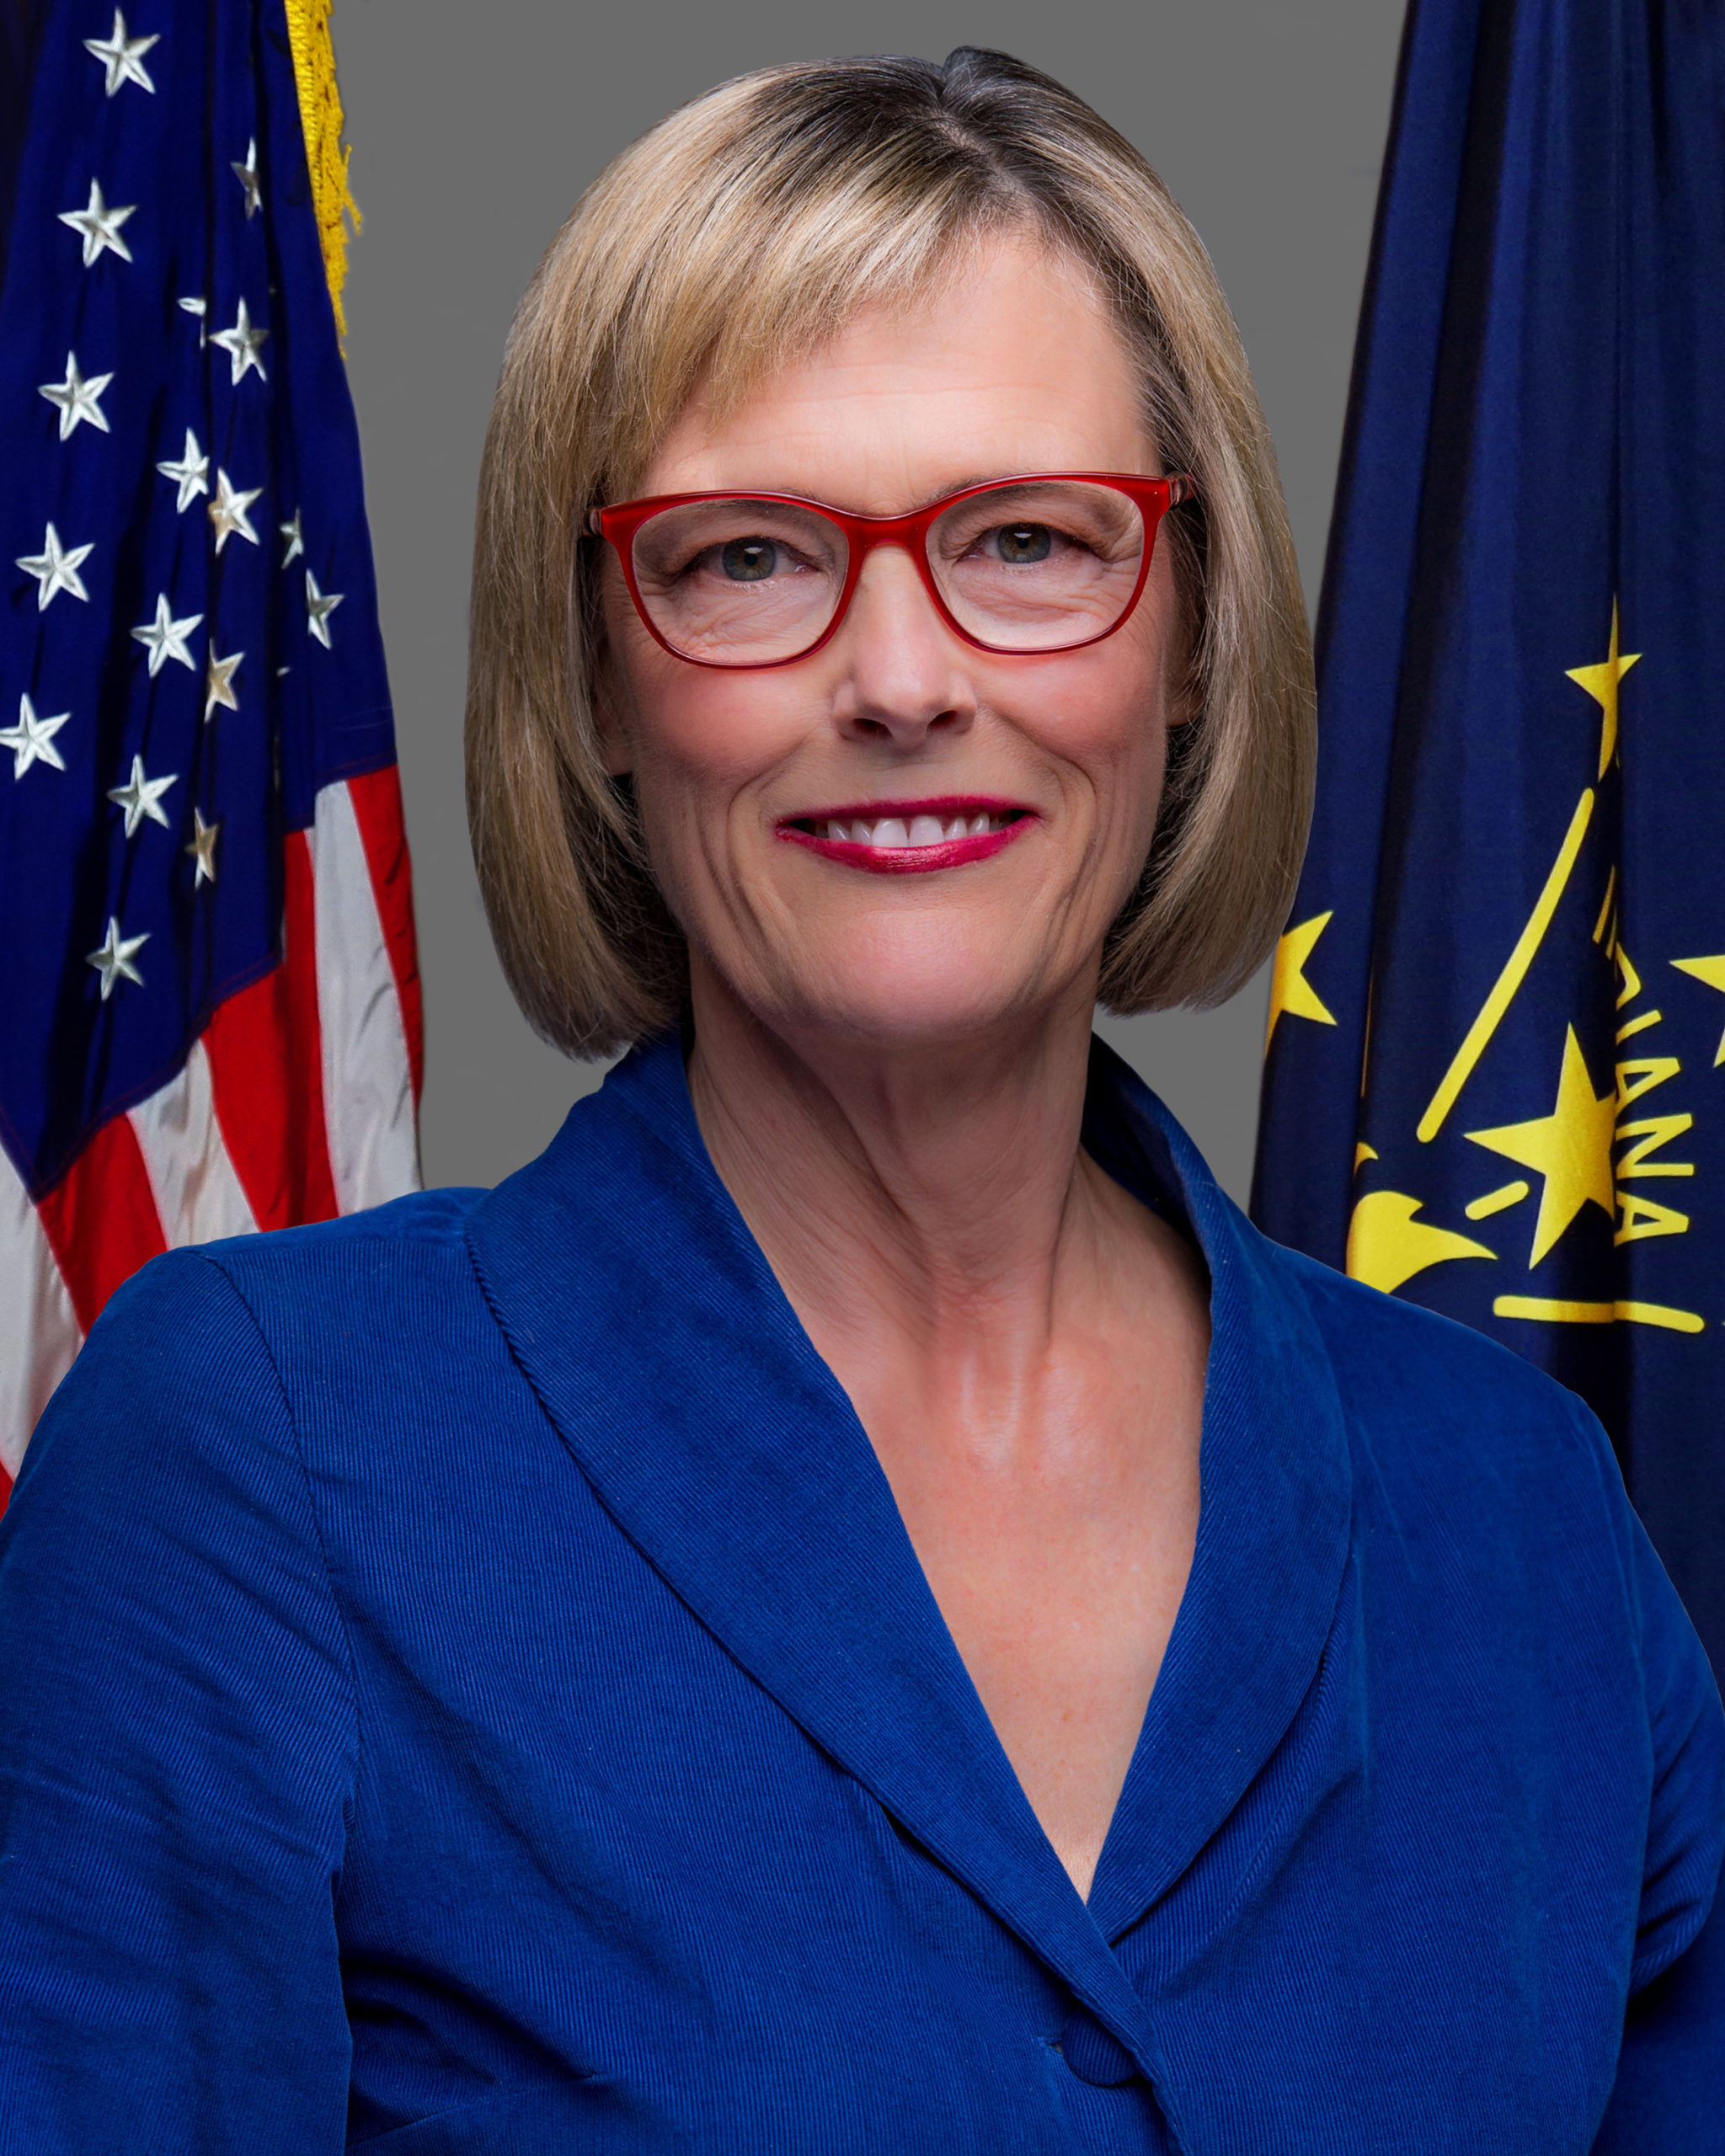 Indiana Lt. Governor Suzanne Crouch